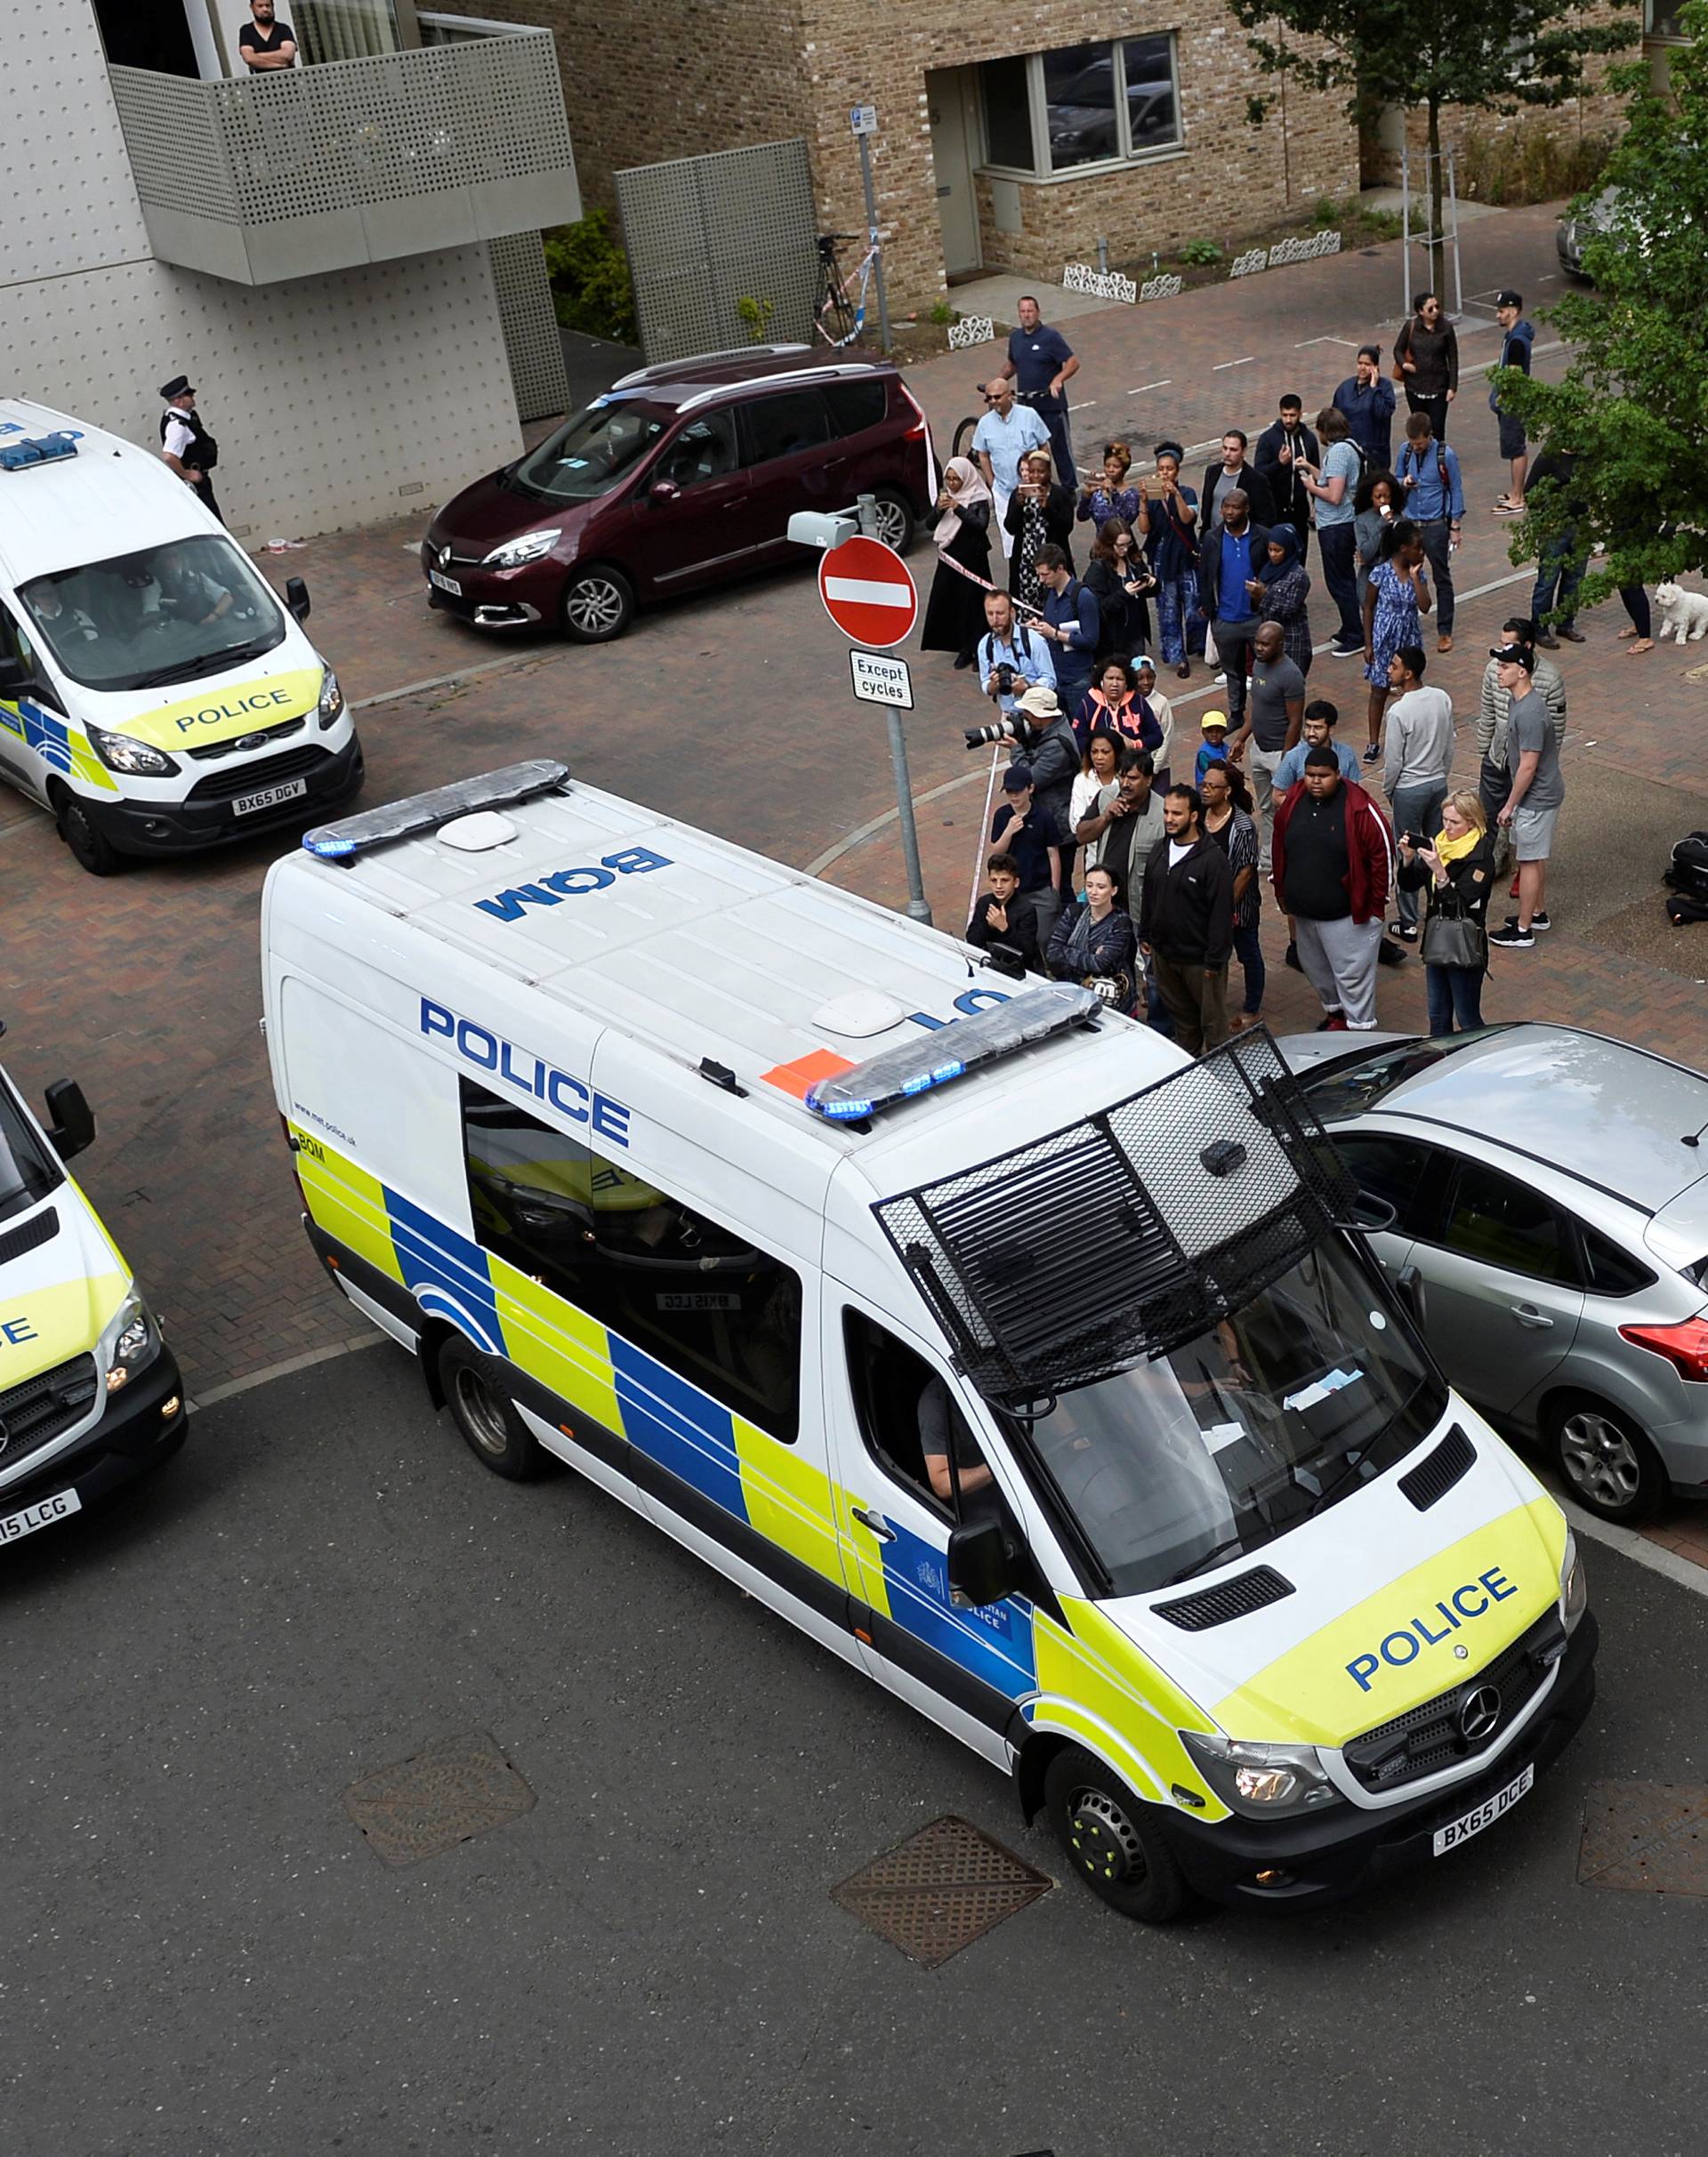 Police vans leave carrying a number of women who were detained after a block of flats was raided in Barking, east London